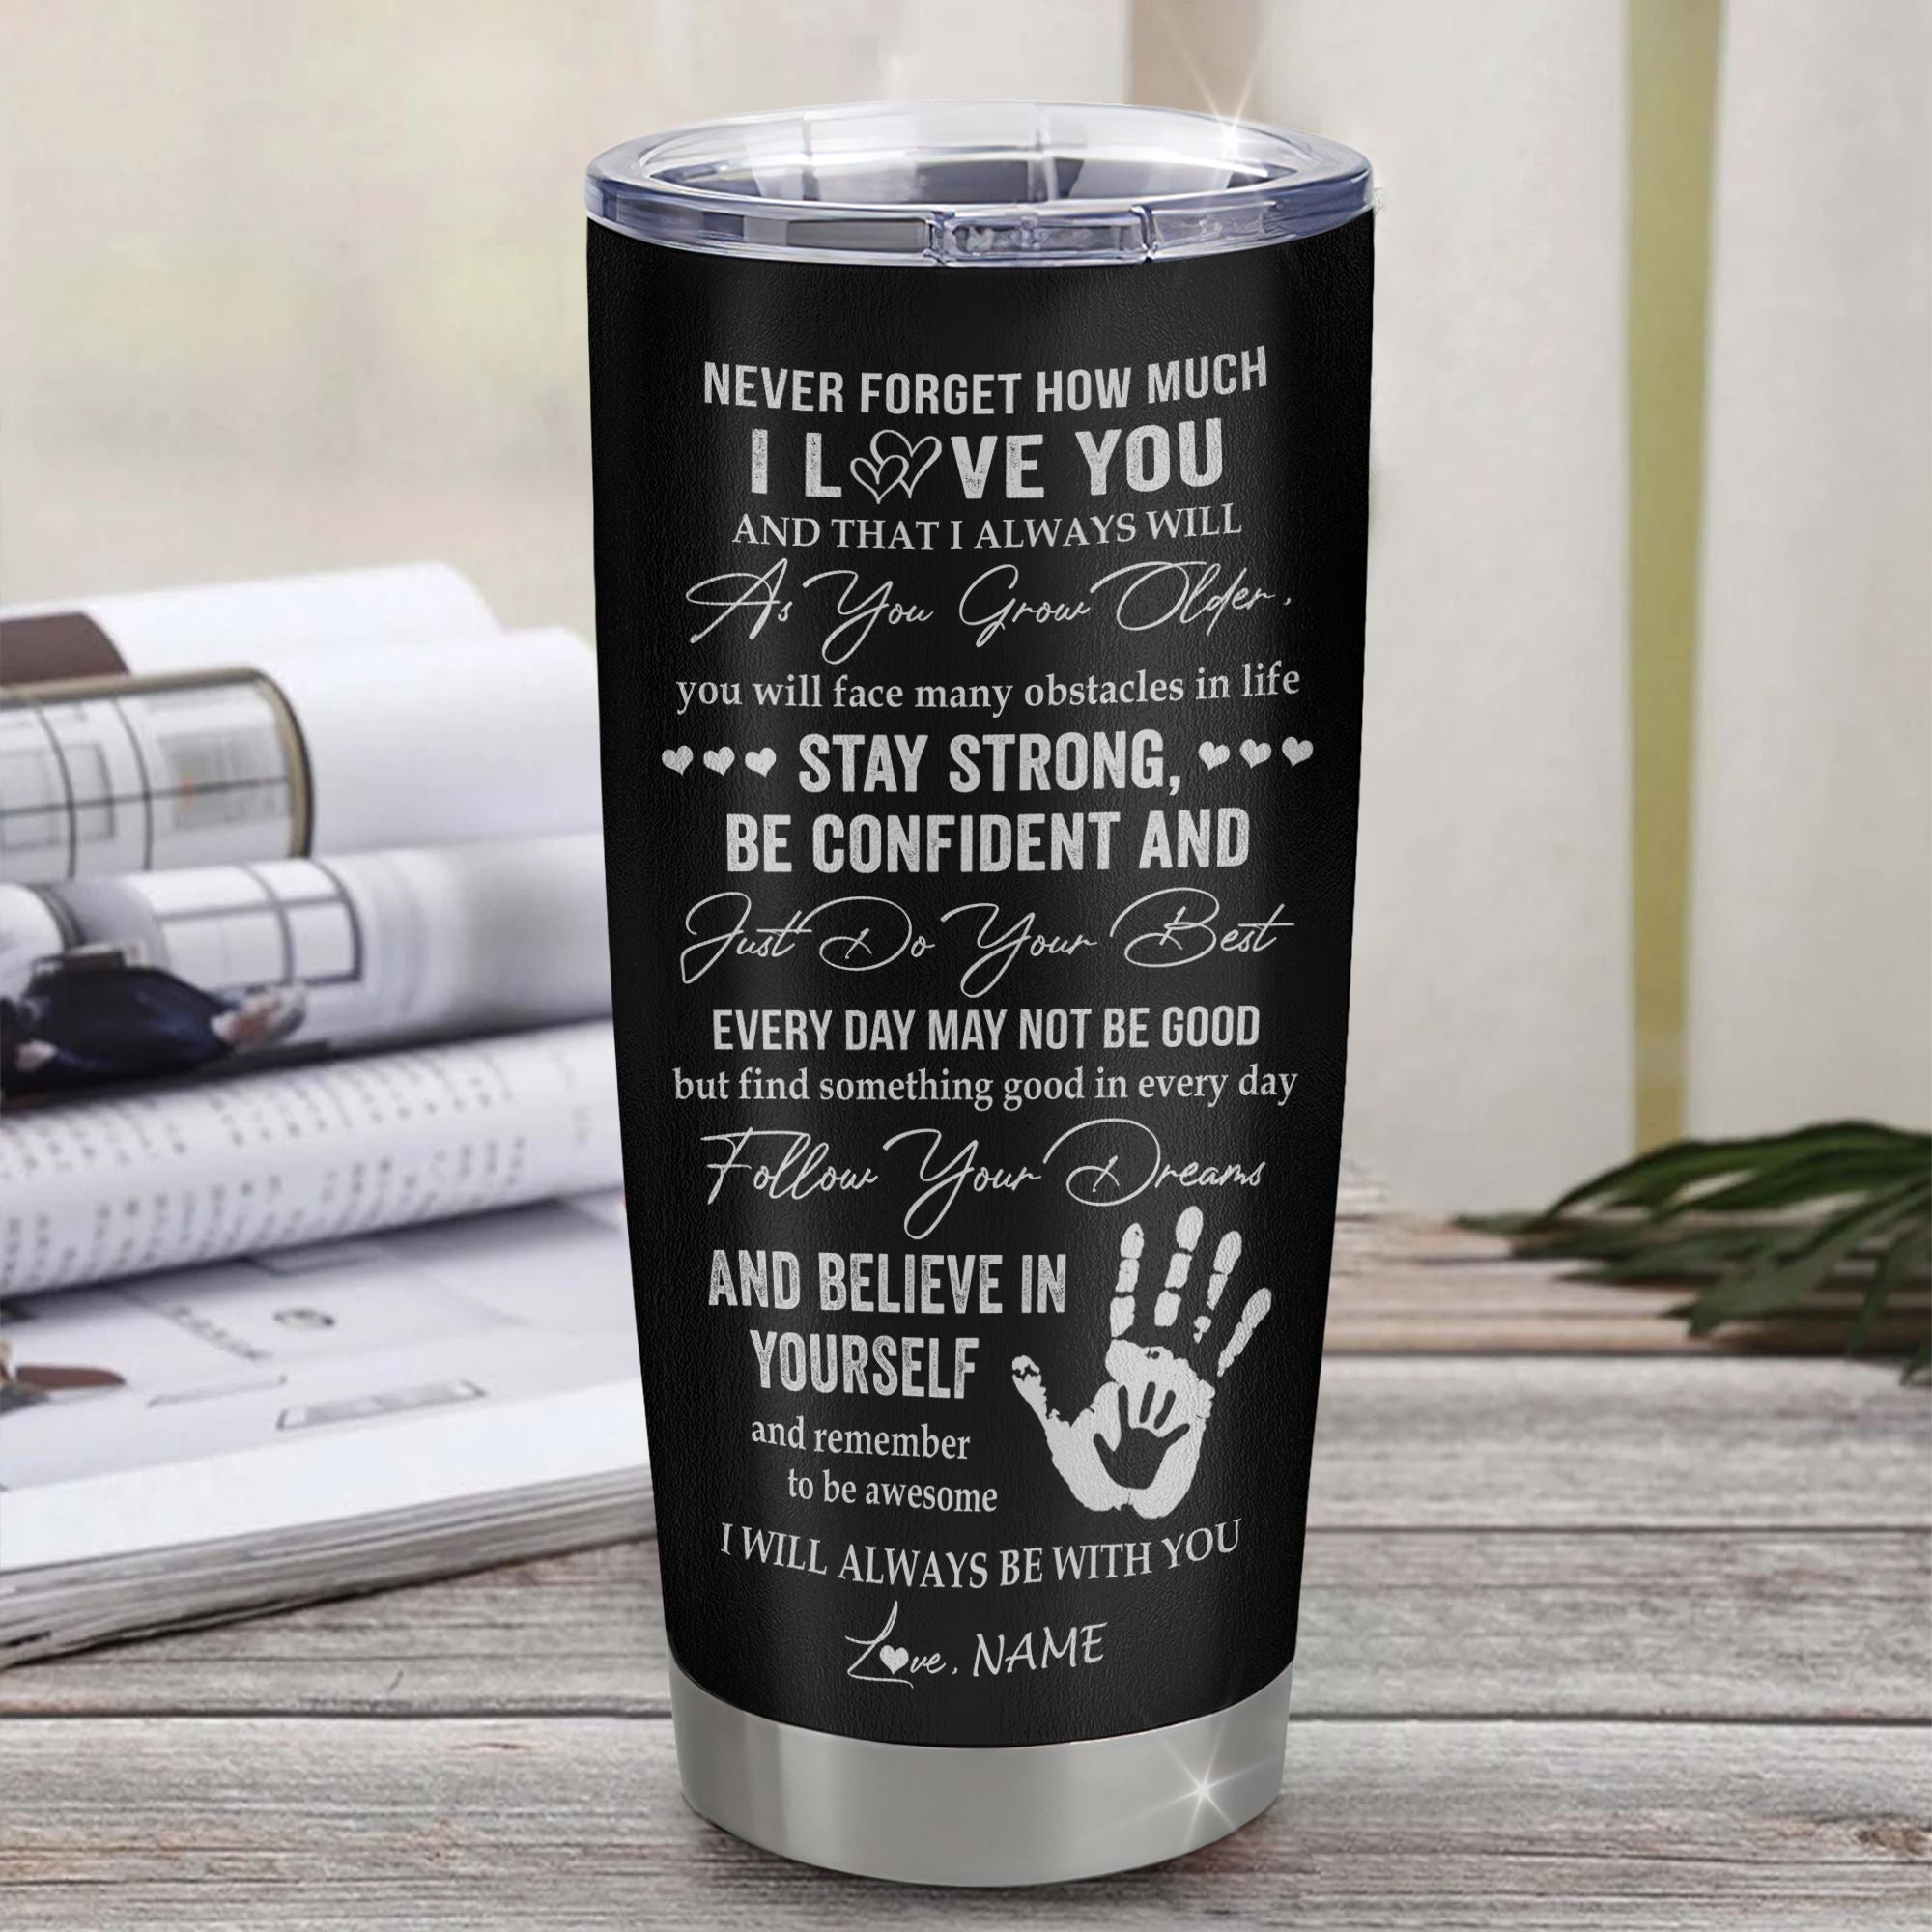 Personalized_To_My_Goddaughter_Tumbler_Stainless_Steel_Cup_I_Love_You_Forever_From_Godmother_Goddaughter_Birthday_Gifts_Christmas_Graduation_Custom_Travel_Mug_Tumbler_mockup_1.jpg